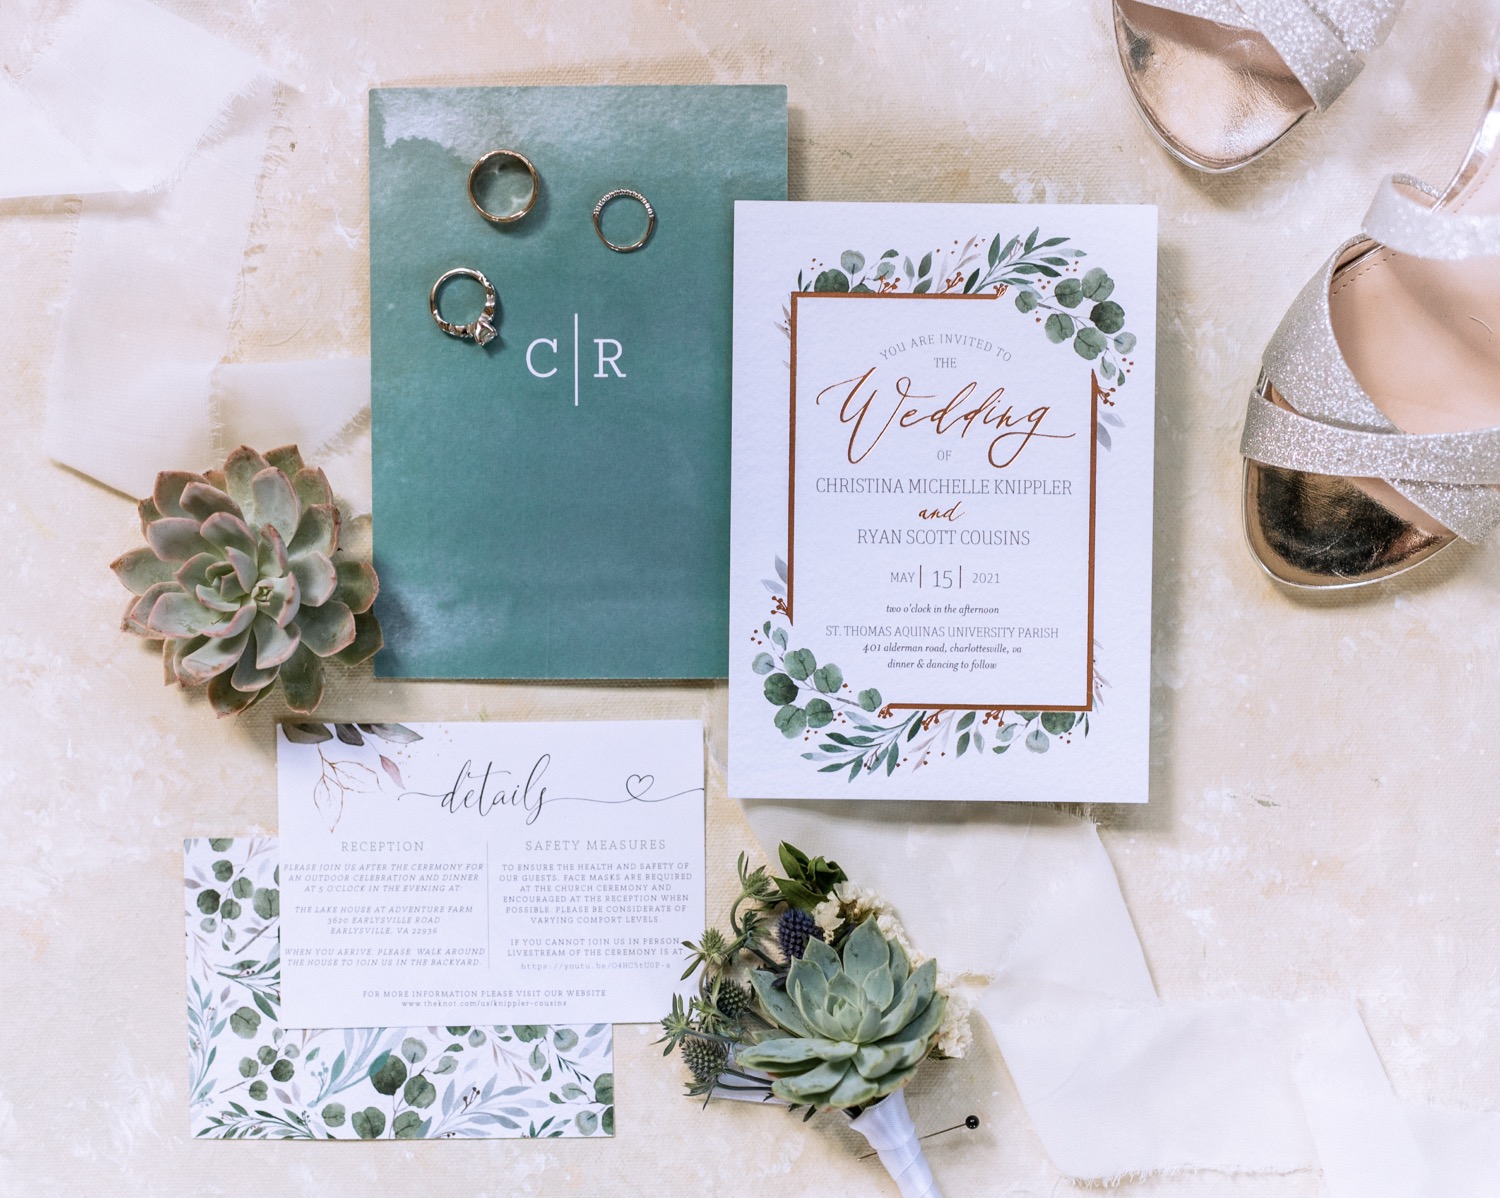 Wedding rings, invitation, and program pictured with succulents